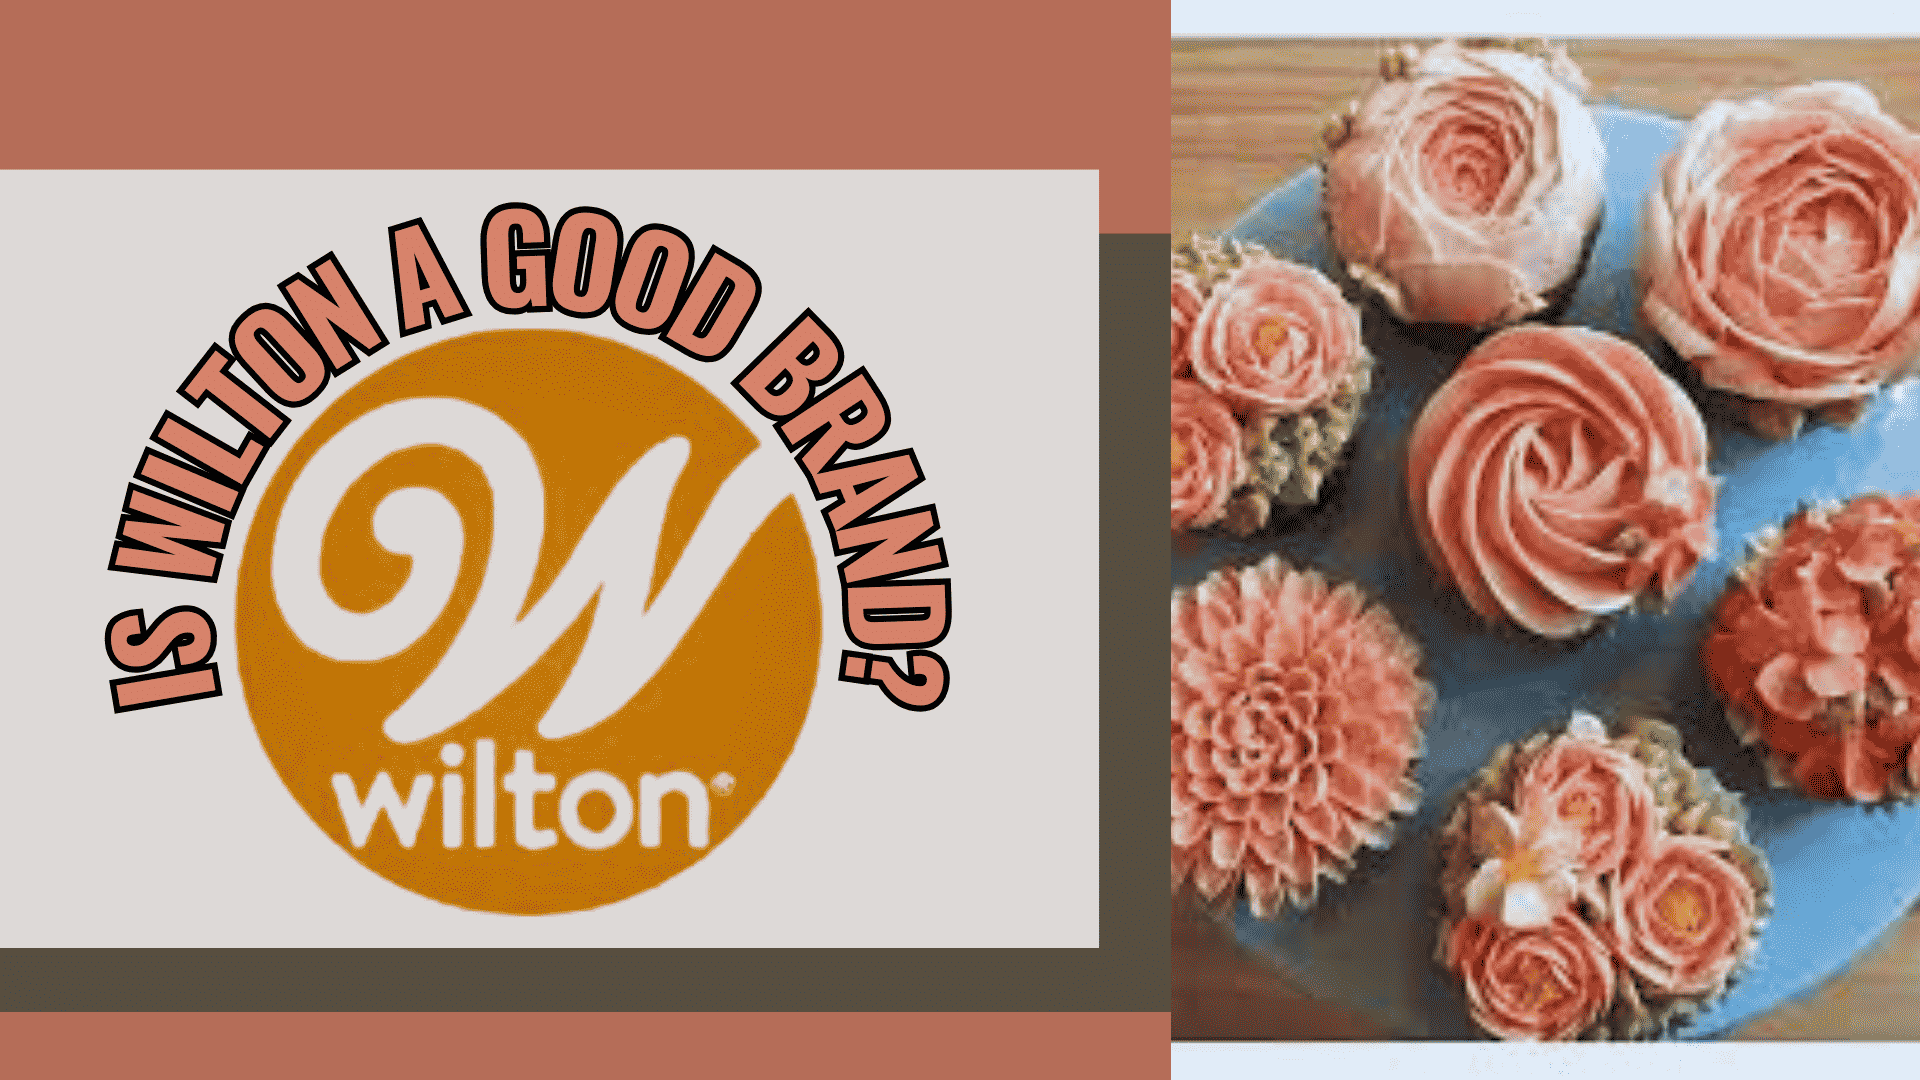 Is wilton a good brand?